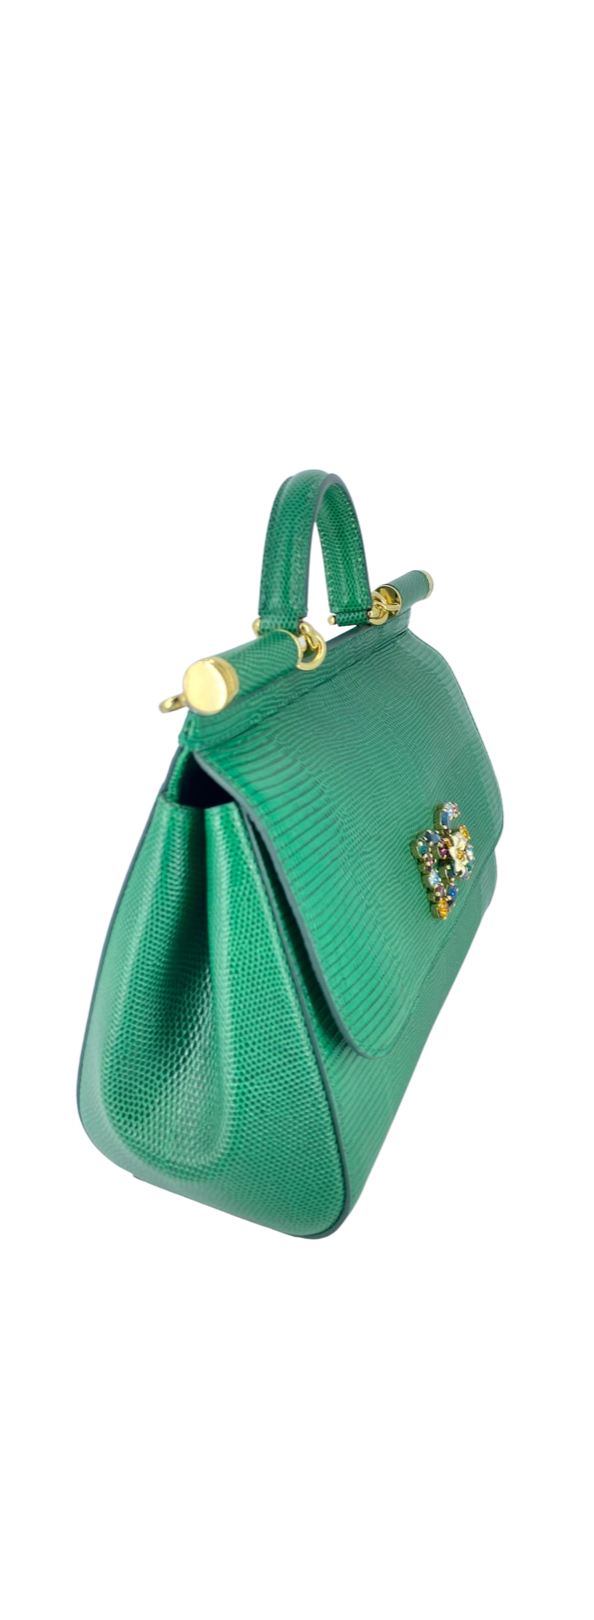 Sicily Small Leather Shoulder Bag in Green - Dolce Gabbana